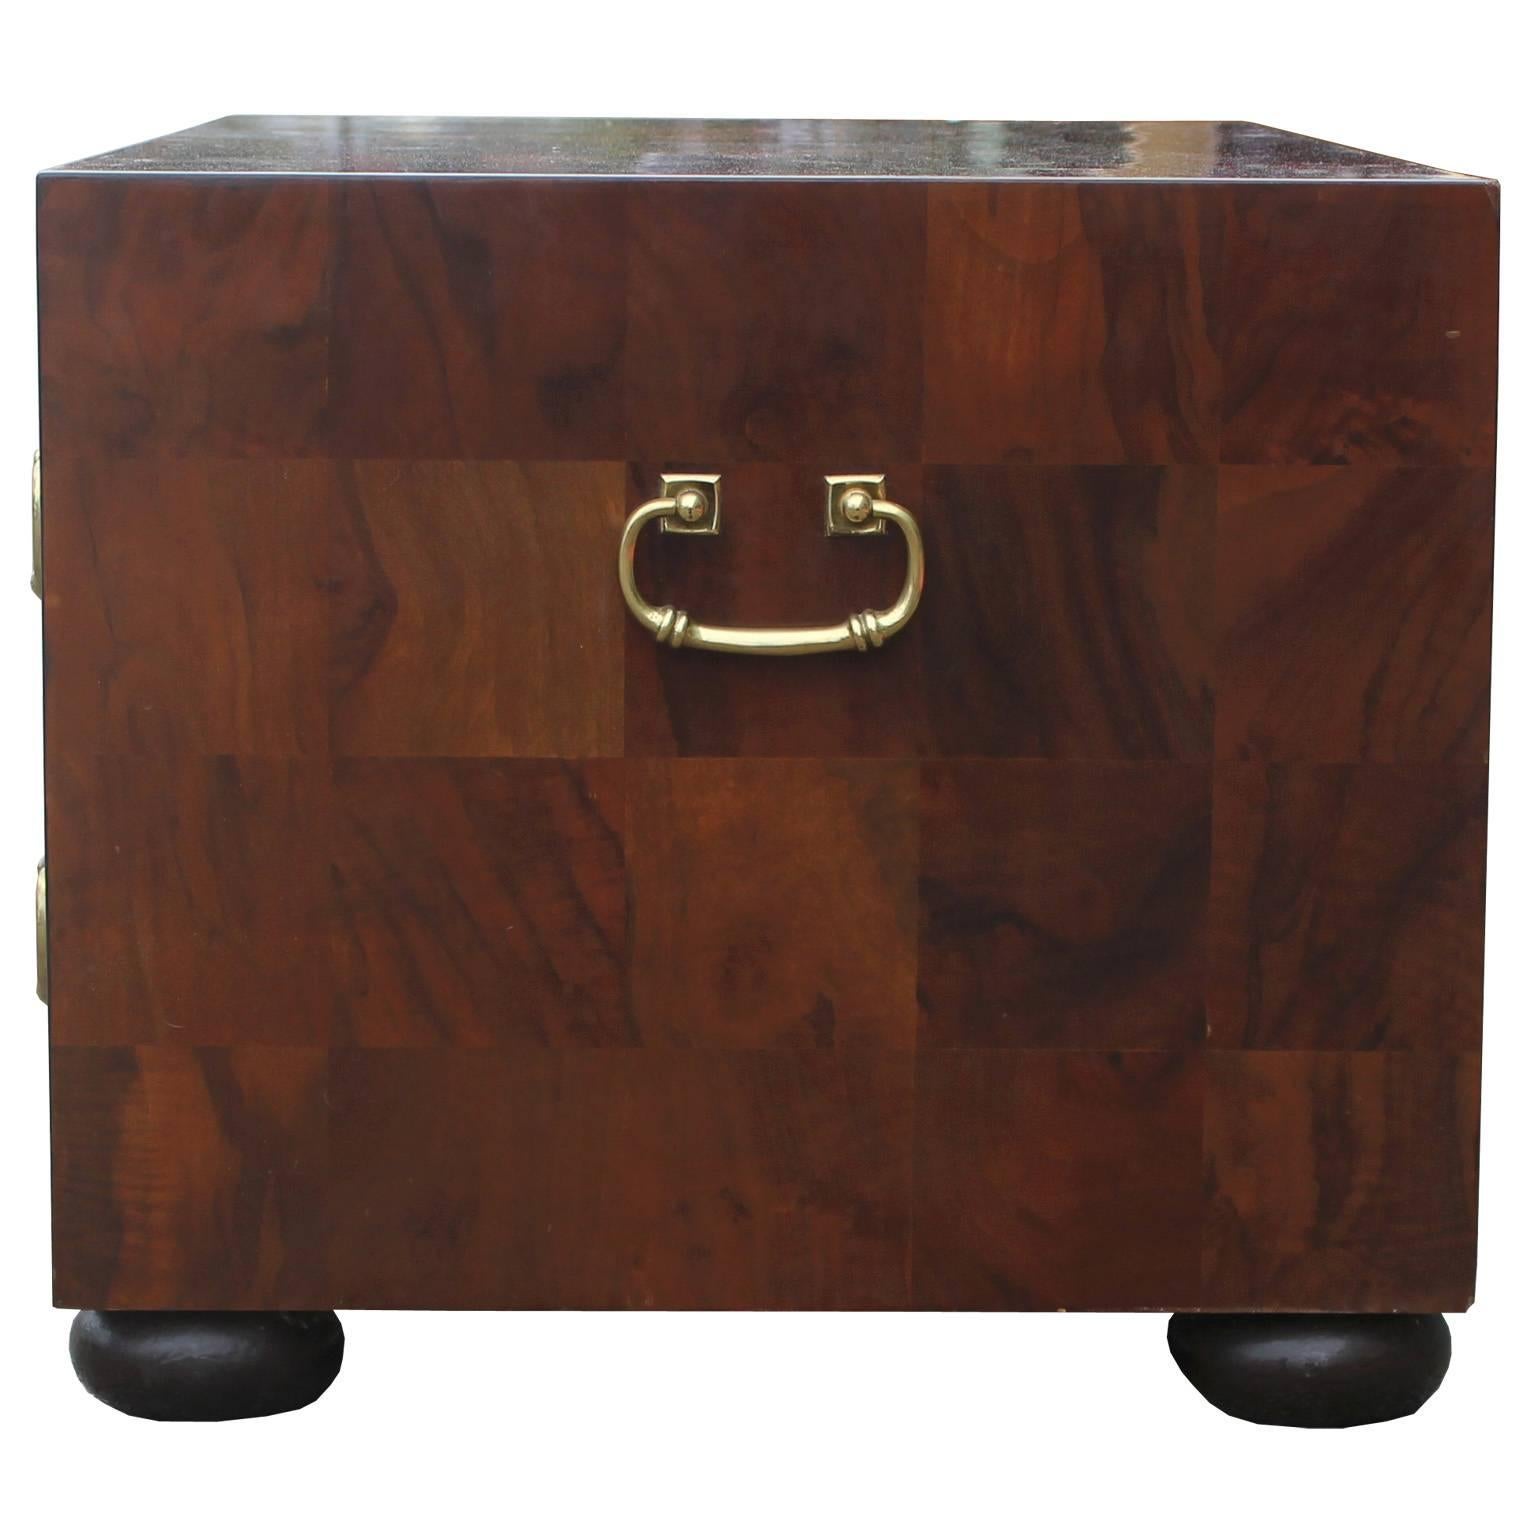 American Modern Checkered Parquetry Low Chest with Brass Hardware